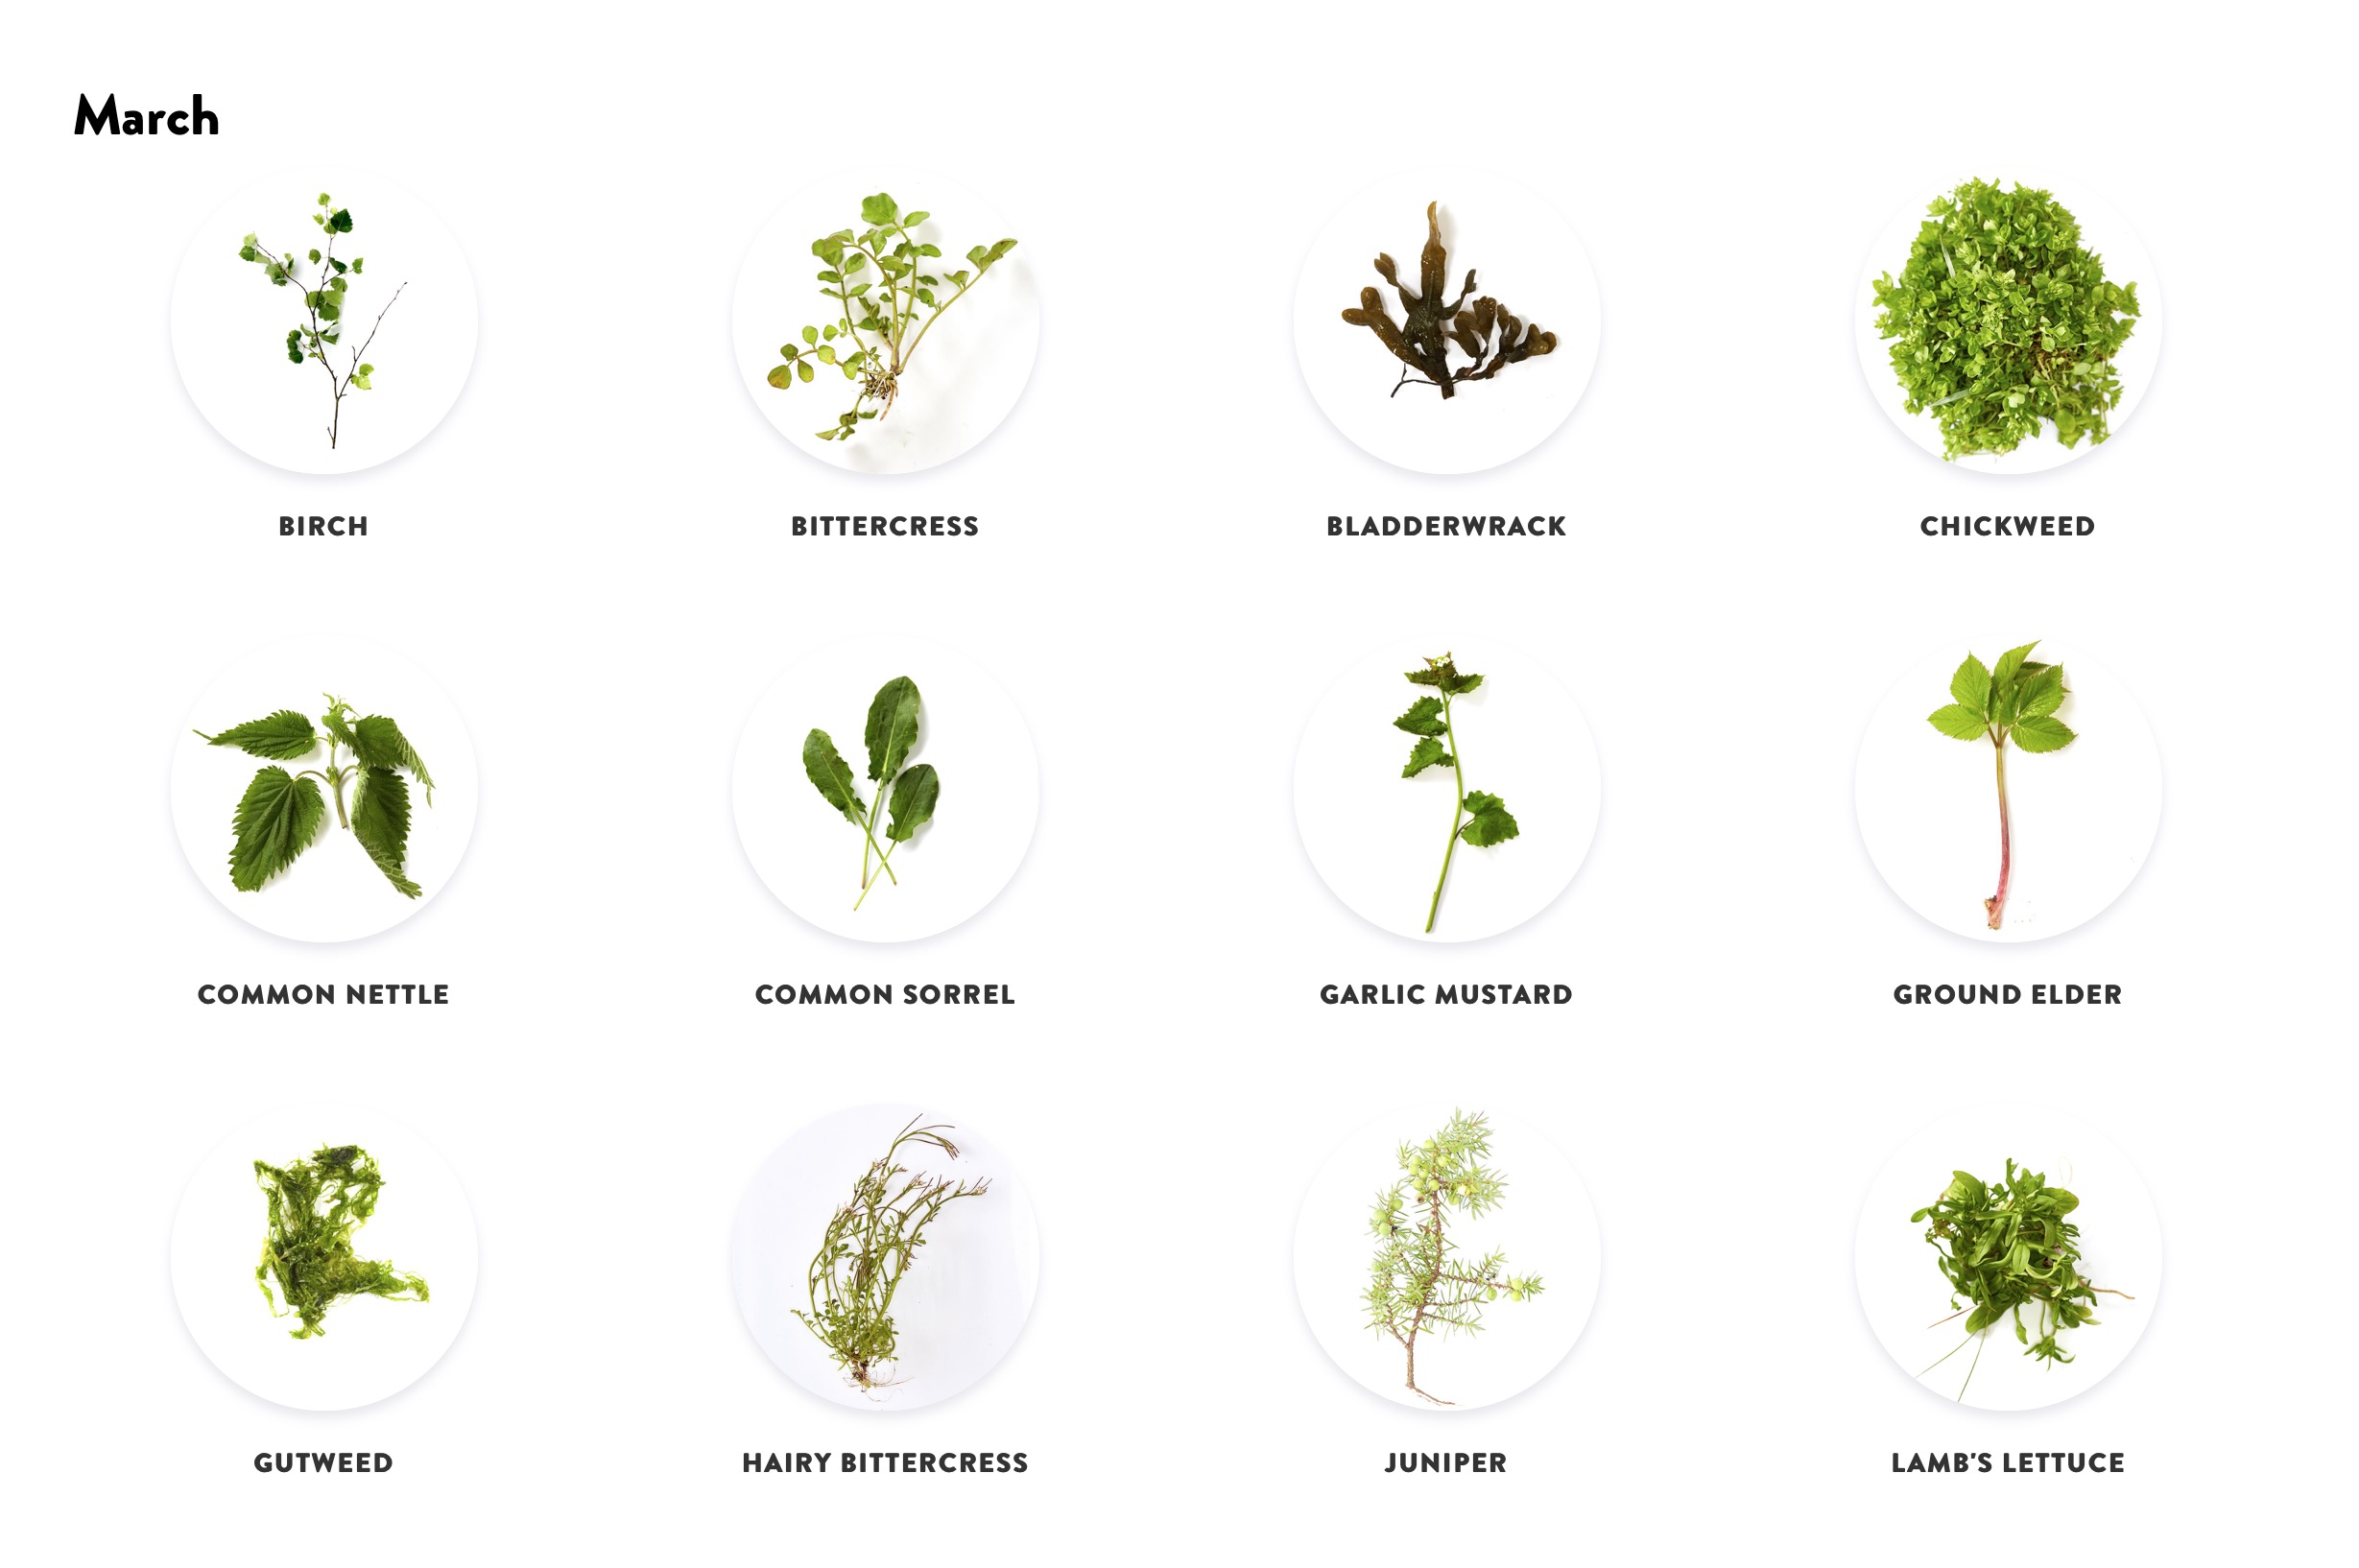 You can browse an encyclopedia of wild ingredients found in Denmark. You can sort ingredients by season, type of plant, or alphabetically. Click on an ingredient to find a detailed description, an explanation of its natural surroundings and sensory qualities, guidelines for preparation and use in the kitchen, suggested recipes, and notes on the risks of mistaking it for another plant.